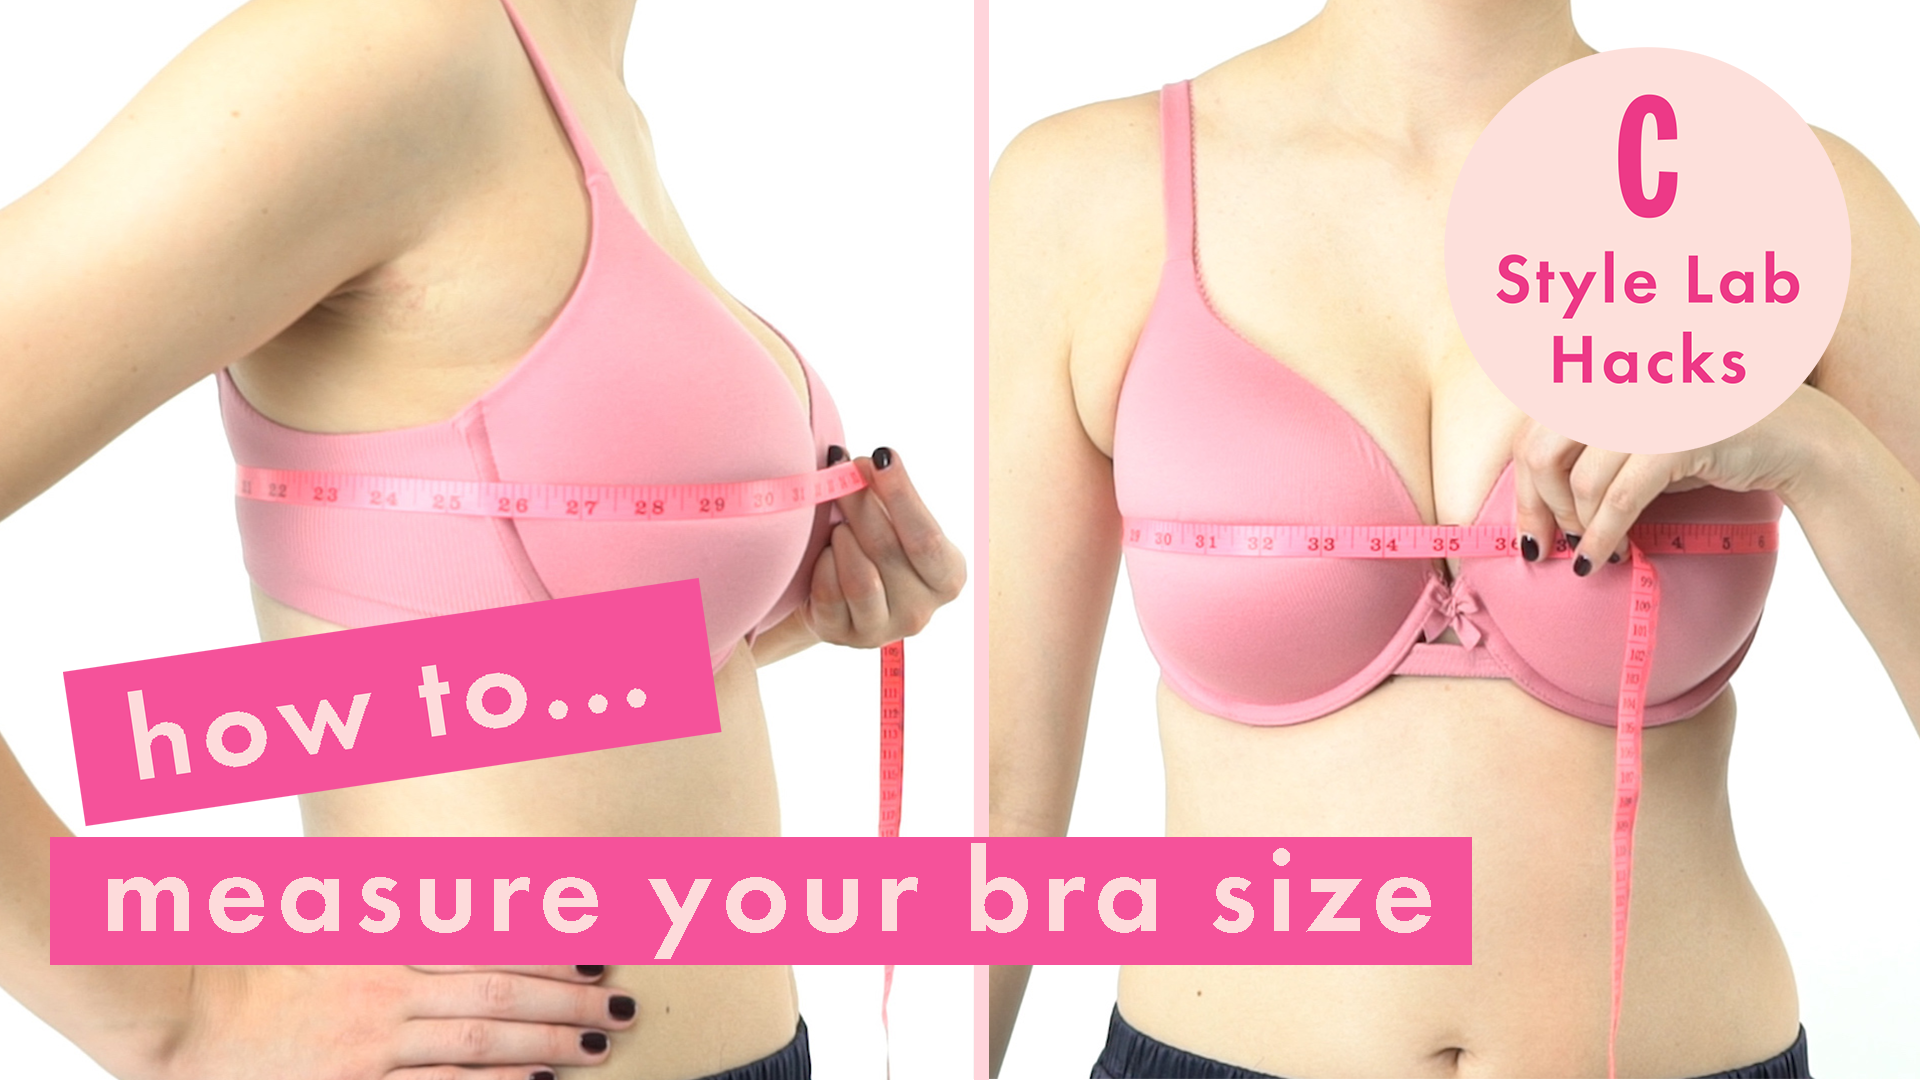 I want to calculate my bra size based on my current